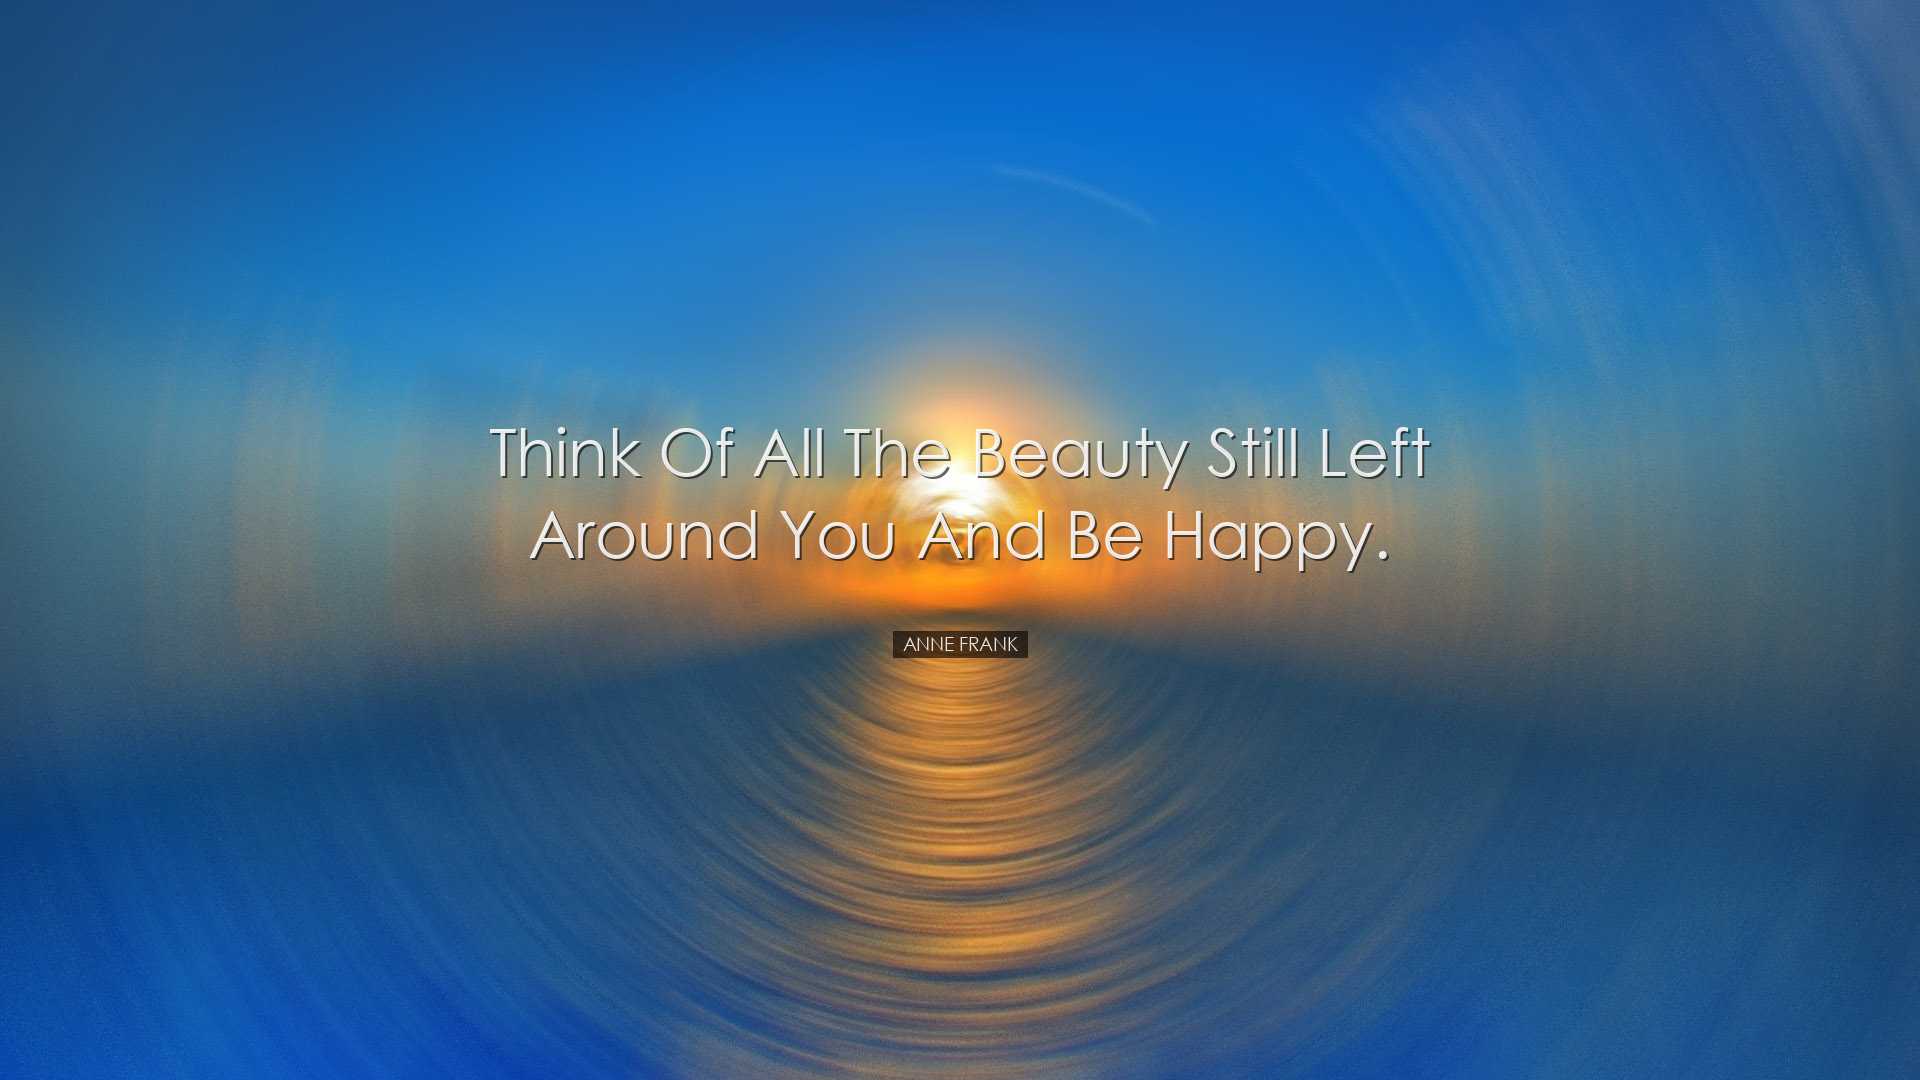 Think of all the beauty still left around you and be happy. - Anne